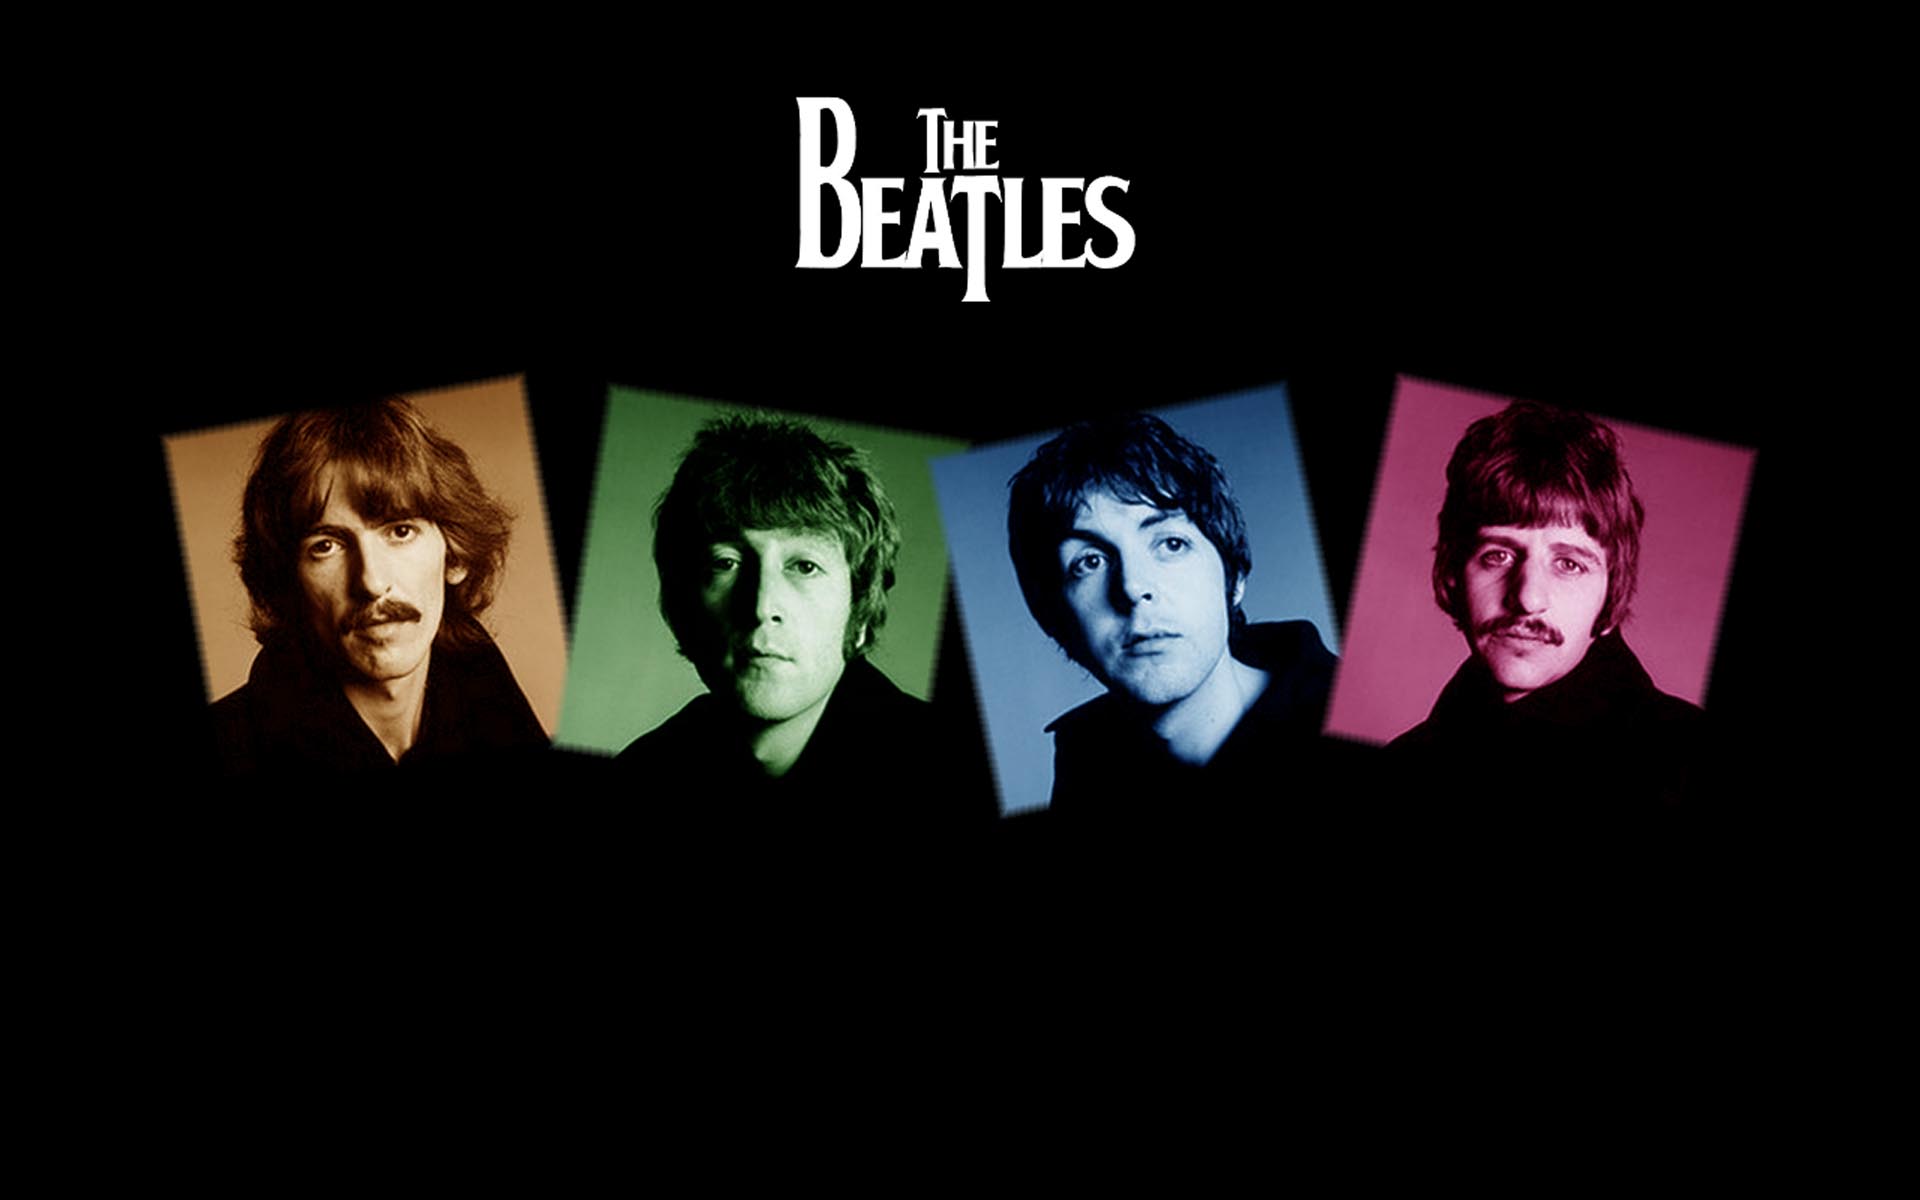 Download Download The Beatles Wallpaper in high resolution for free